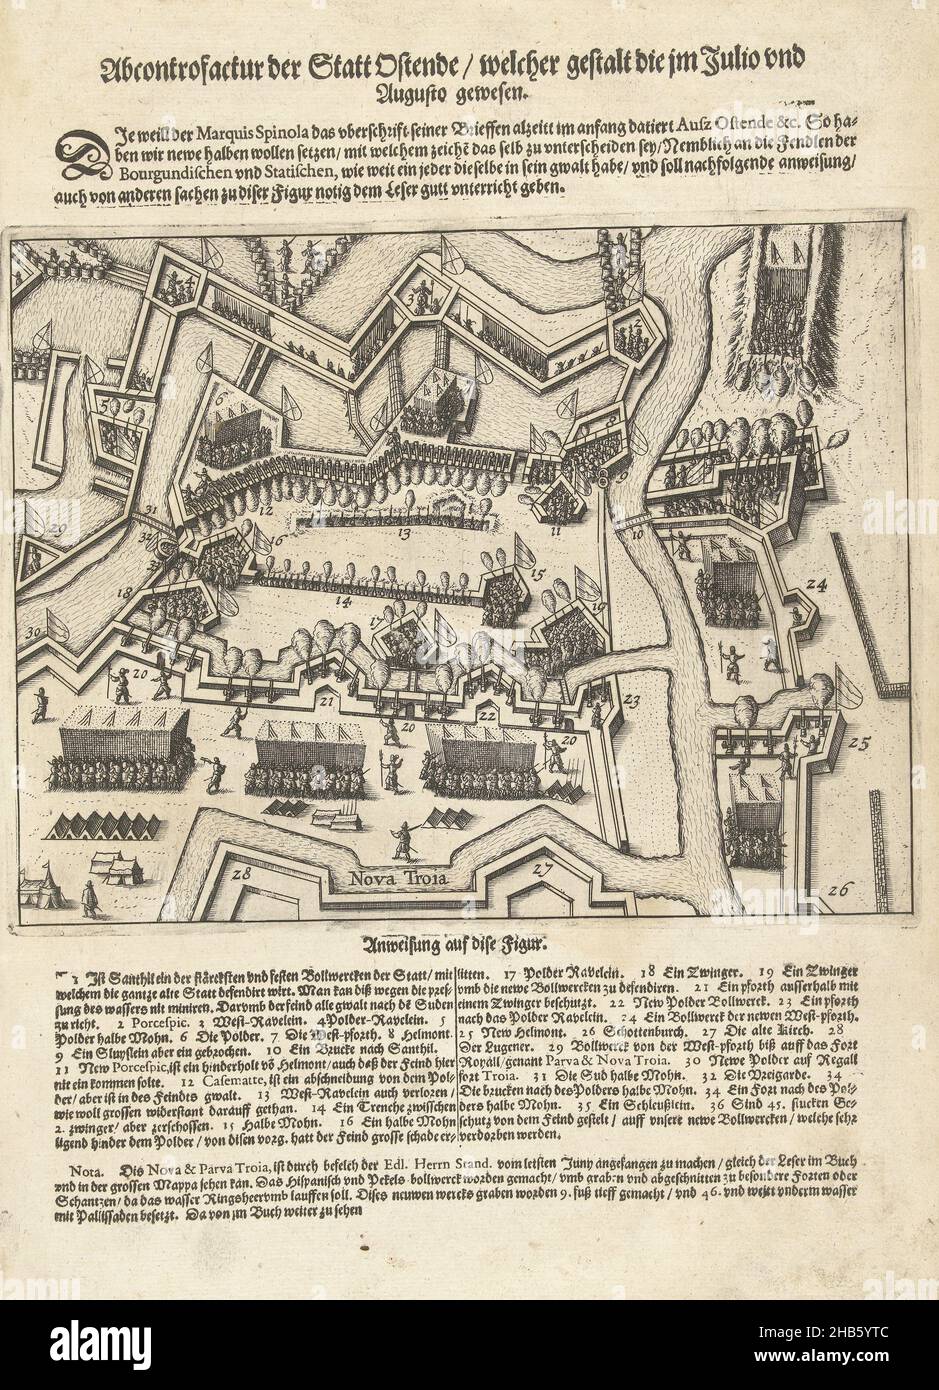 Siege of Ostend: the cut-offs and the New Troy, 1604, Abcontroversy of the city of Ostende, welcher gestalt im Julio und Augusto gewesen (title on object), Siege of Ostend: the cut-offs and the New Troy, the situation in July-August 1604. Above the print the title, below the description in German. Part of the illustrations to a journal of the siege of Ostend 1601-1604., print maker: anonymous, print maker: Baptista van Doetechum (possibly), Low Countries, 1604, paper, etching, letterpress printing, height 175 mm × width 225 mmheight 350 mm × width 240 mm Stock Photo